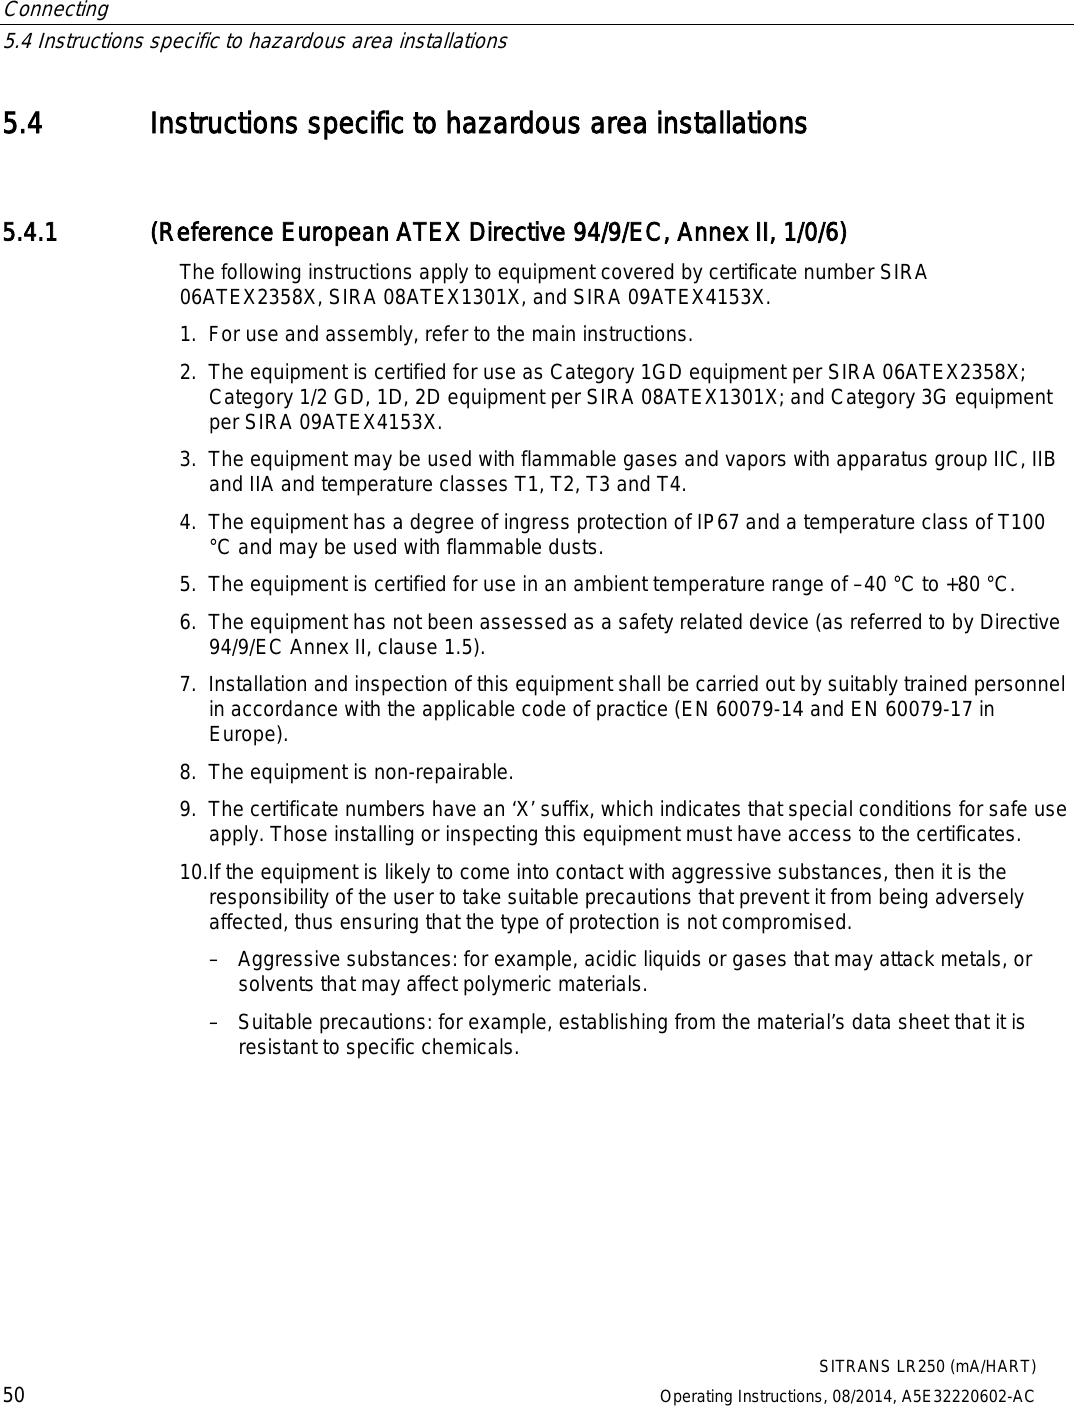 Connecting   5.4 Instructions specific to hazardous area installations  SITRANS LR250 (mA/HART) 50 Operating Instructions, 08/2014, A5E32220602-AC 5.4 Instructions specific to hazardous area installations 5.4.1 (Reference European ATEX Directive 94/9/EC, Annex II, 1/0/6) The following instructions apply to equipment covered by certificate number SIRA 06ATEX2358X, SIRA 08ATEX1301X, and SIRA 09ATEX4153X. 1. For use and assembly, refer to the main instructions. 2. The equipment is certified for use as Category 1GD equipment per SIRA 06ATEX2358X; Category 1/2 GD, 1D, 2D equipment per SIRA 08ATEX1301X; and Category 3G equipment per SIRA 09ATEX4153X. 3. The equipment may be used with flammable gases and vapors with apparatus group IIC, IIB and IIA and temperature classes T1, T2, T3 and T4. 4. The equipment has a degree of ingress protection of IP67 and a temperature class of T100 °C and may be used with flammable dusts. 5. The equipment is certified for use in an ambient temperature range of –40 °C to +80 °C. 6. The equipment has not been assessed as a safety related device (as referred to by Directive 94/9/EC Annex II, clause 1.5). 7. Installation and inspection of this equipment shall be carried out by suitably trained personnel in accordance with the applicable code of practice (EN 60079-14 and EN 60079-17 in Europe). 8. The equipment is non-repairable. 9. The certificate numbers have an ‘X’ suffix, which indicates that special conditions for safe use apply. Those installing or inspecting this equipment must have access to the certificates. 10.If the equipment is likely to come into contact with aggressive substances, then it is the responsibility of the user to take suitable precautions that prevent it from being adversely affected, thus ensuring that the type of protection is not compromised. – Aggressive substances: for example, acidic liquids or gases that may attack metals, or solvents that may affect polymeric materials. – Suitable precautions: for example, establishing from the material’s data sheet that it is resistant to specific chemicals. 